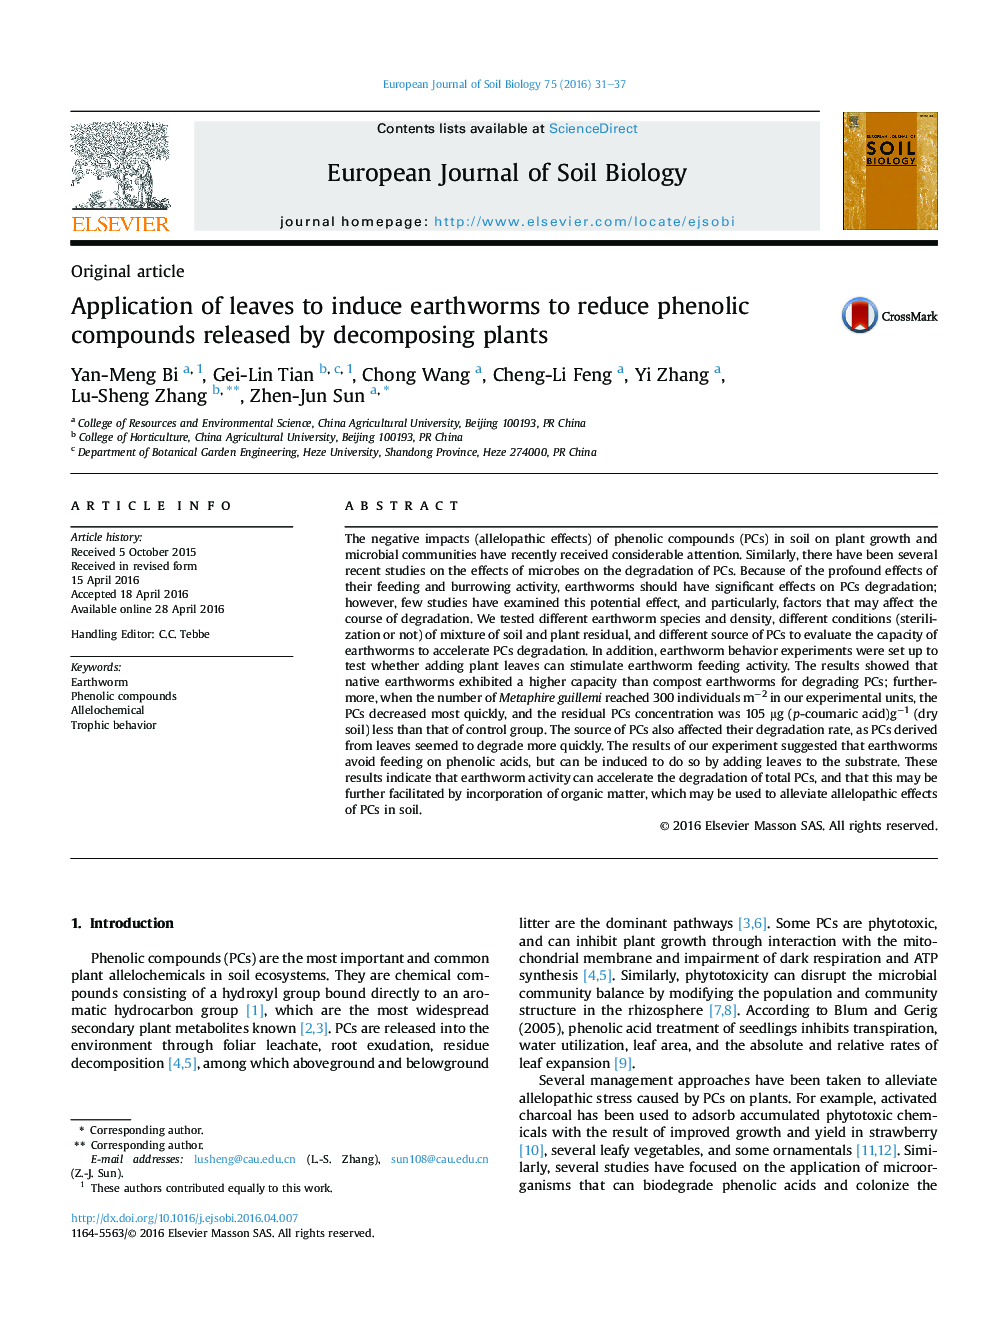 Application of leaves to induce earthworms to reduce phenolic compounds released by decomposing plants